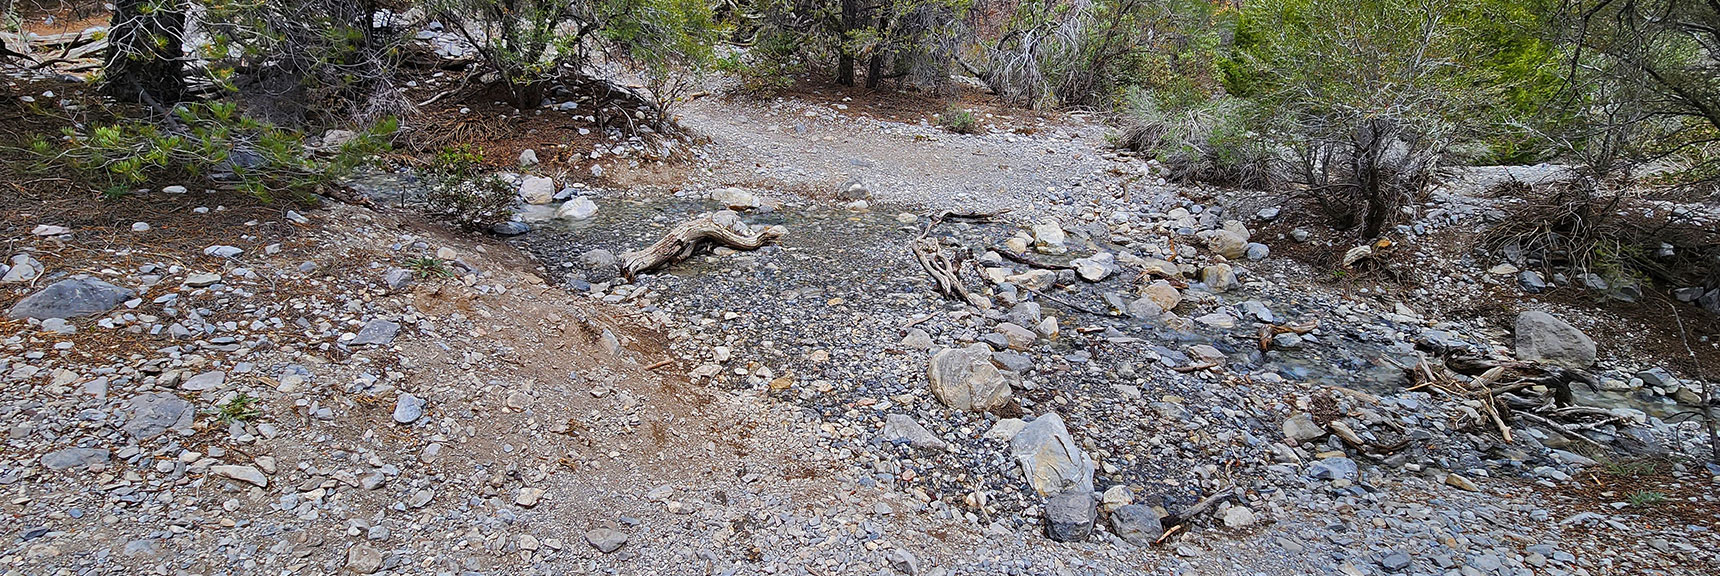 Many Creek Crossings Today. All Shallow. Can Maintain Dry Shoes. | Fletcher Canyon Trail | Mt Charleston Wilderness | Spring Mountains, Nevada